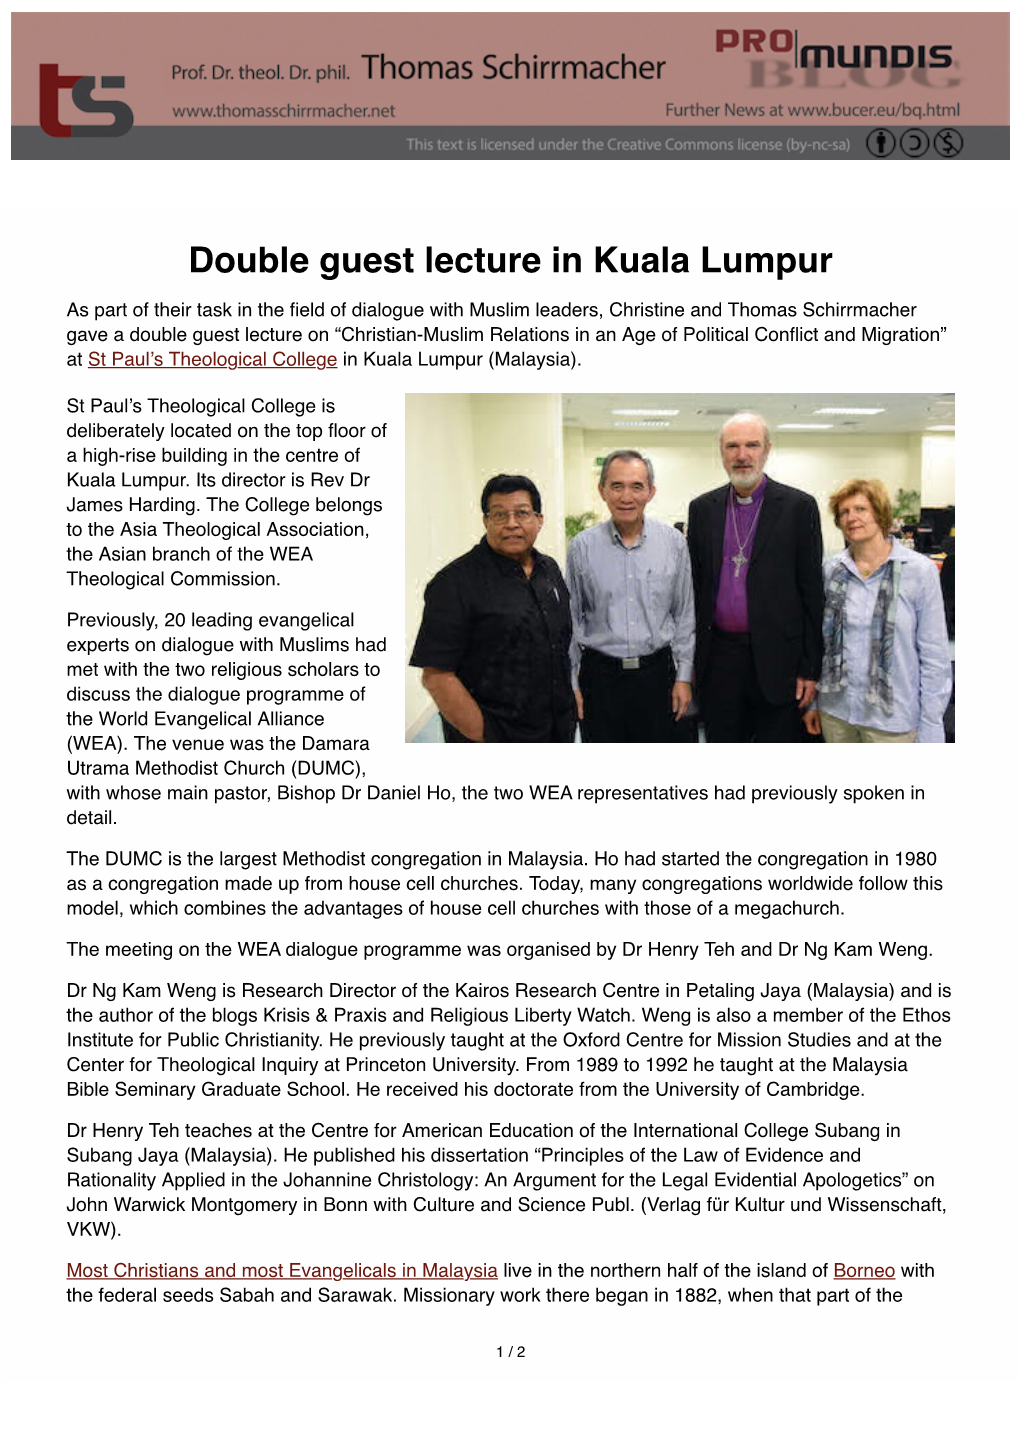 Double Guest Lecture in Kuala Lumpur